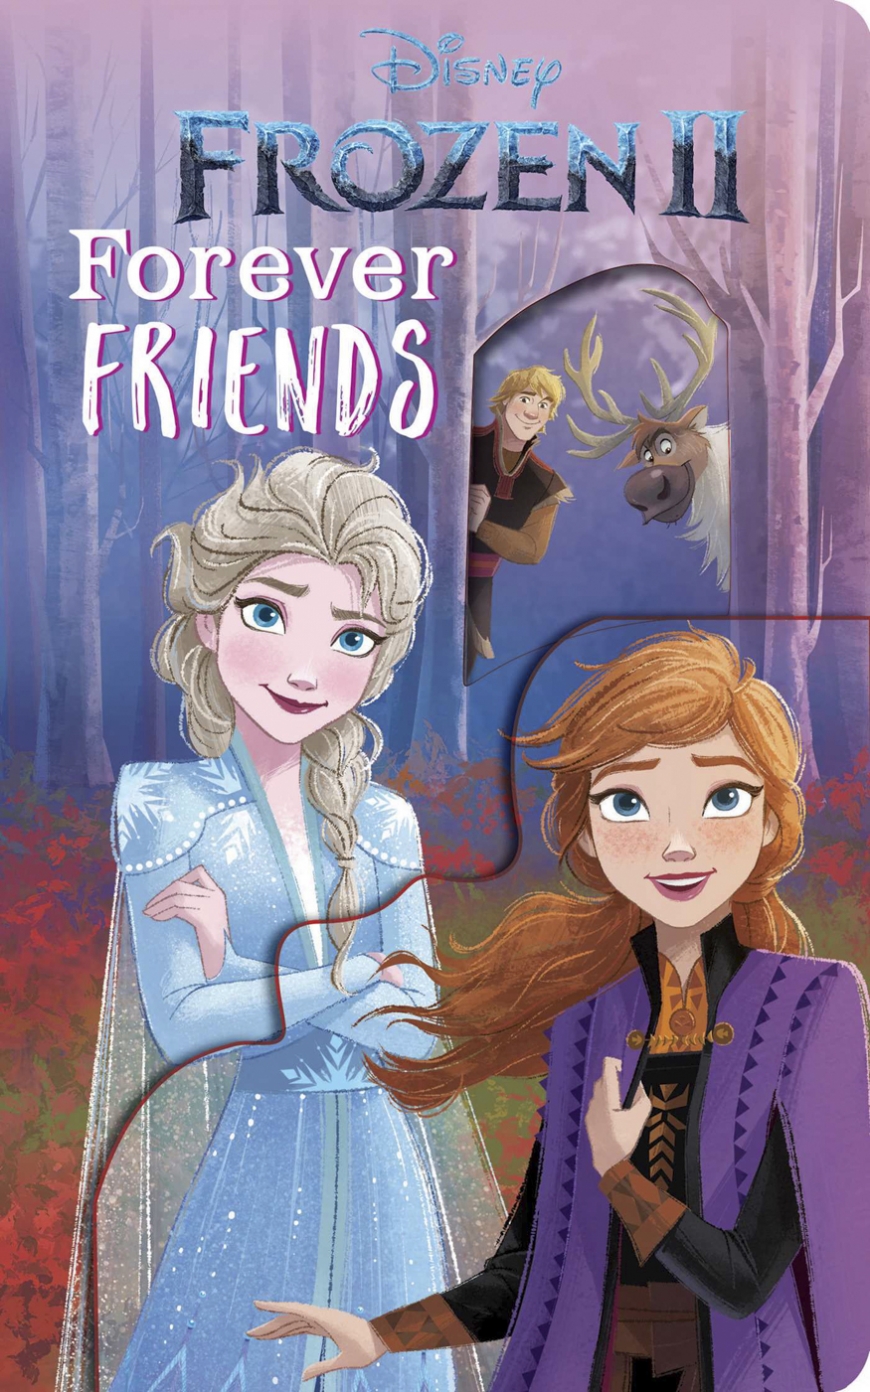 Frozen 2: Forever Friends Deluxe Guess Who book